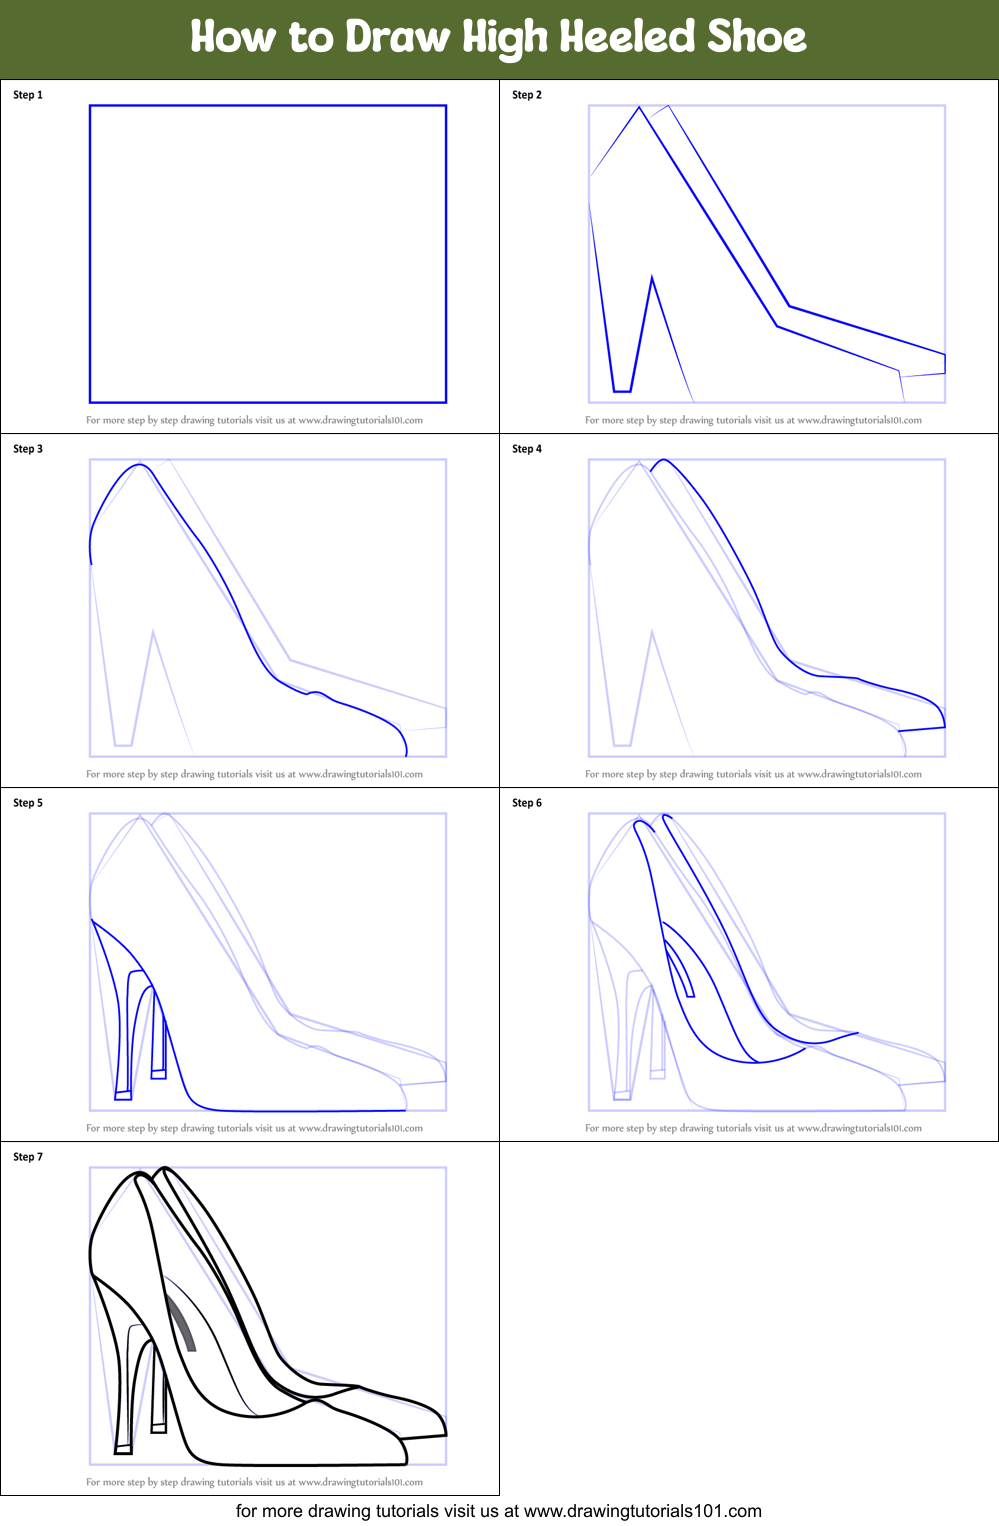 How to Draw High Heeled Shoe printable step by step